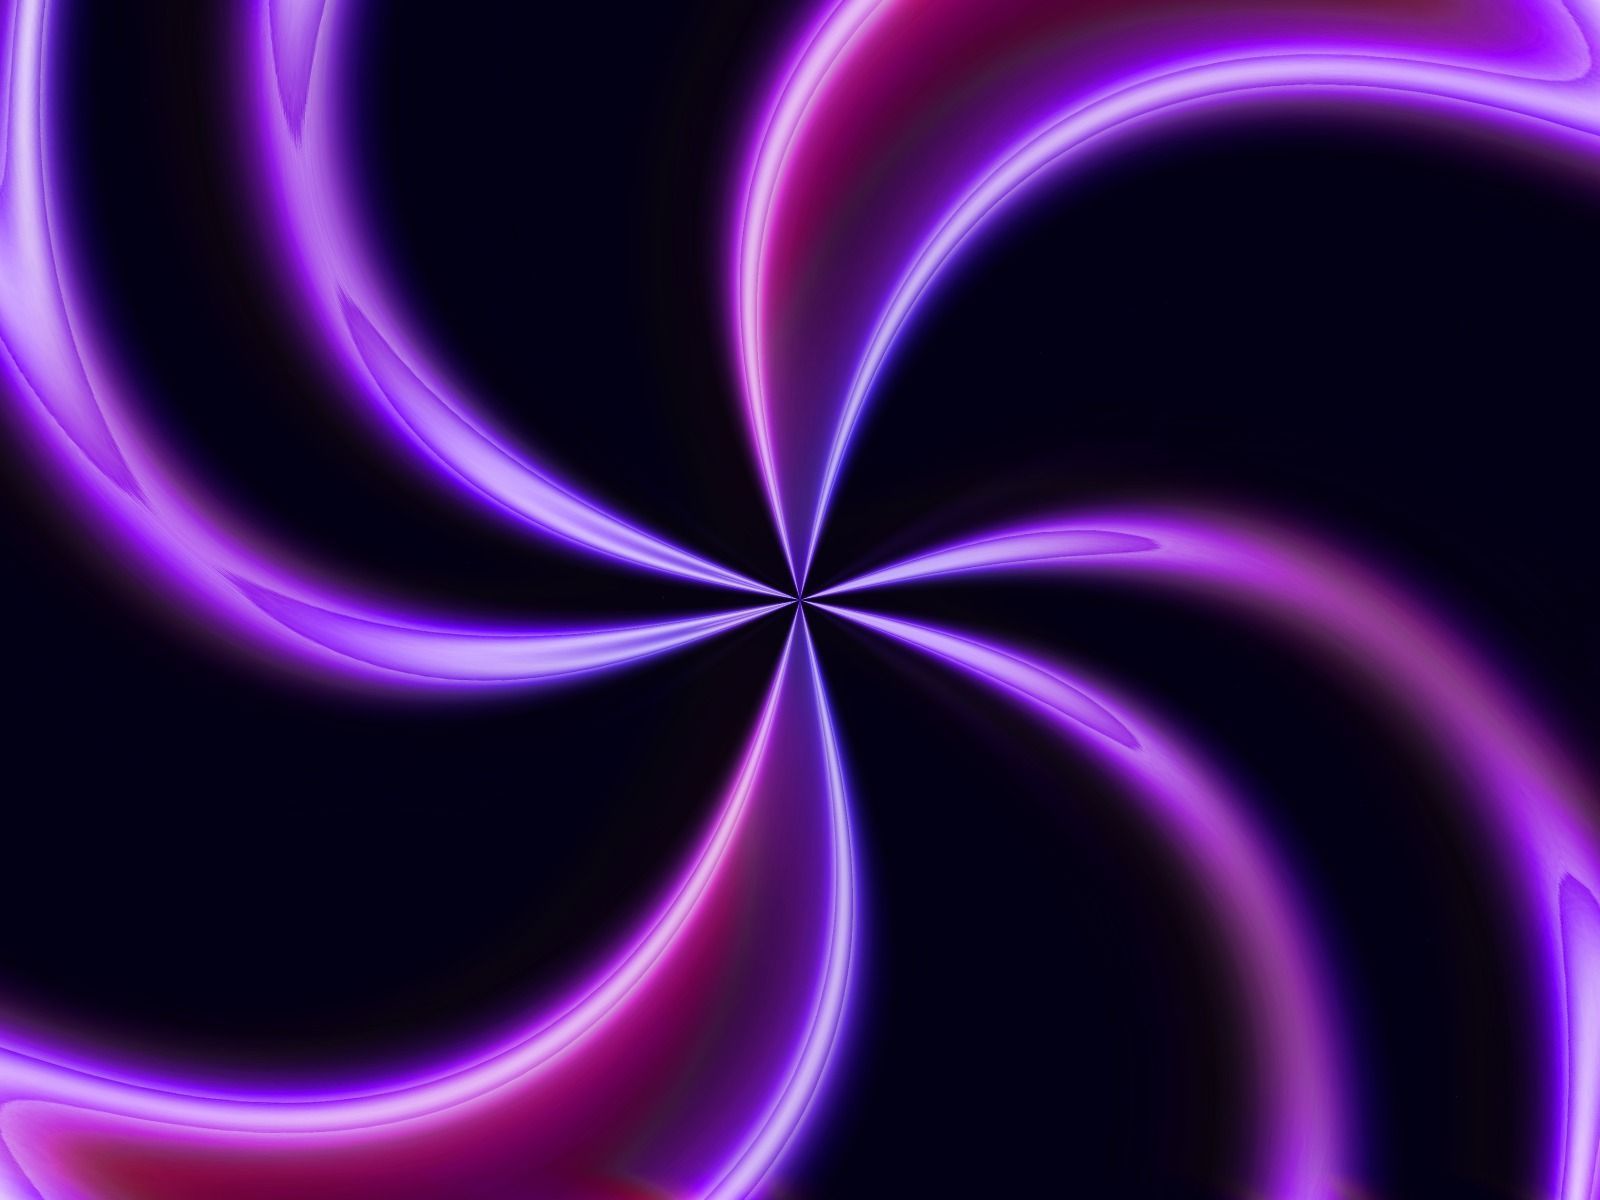 A purple and black abstract background - Neon purple